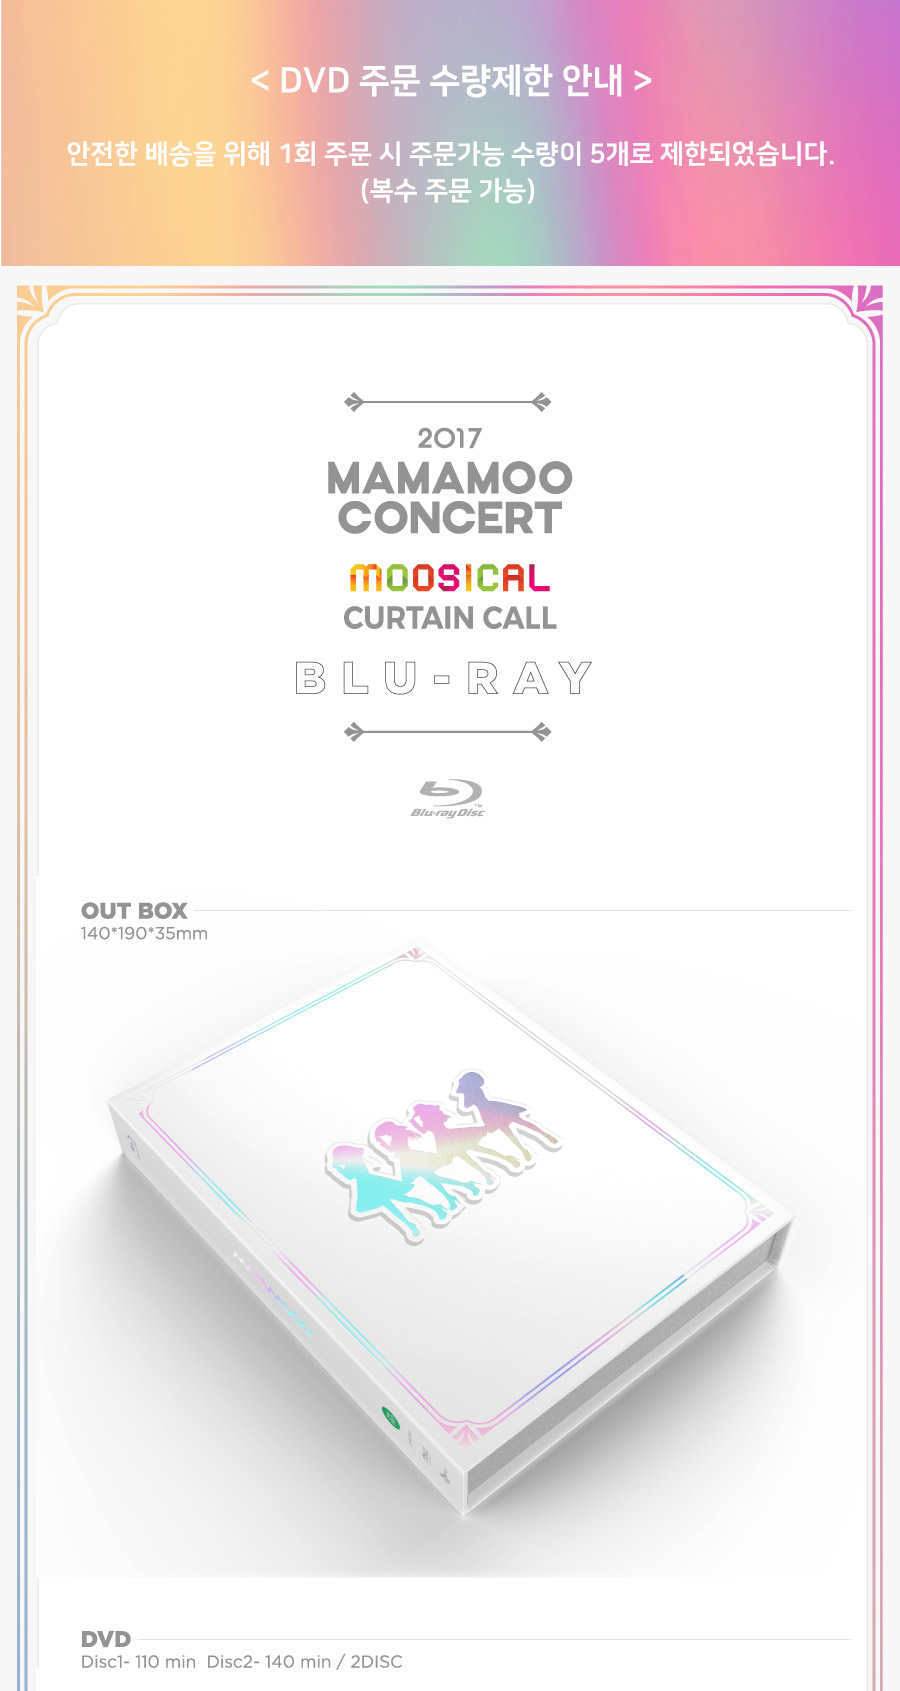 MAMAMOO MOOSICAL CURTAIN CALL CONCERT BLU RAY DVD Preview 1